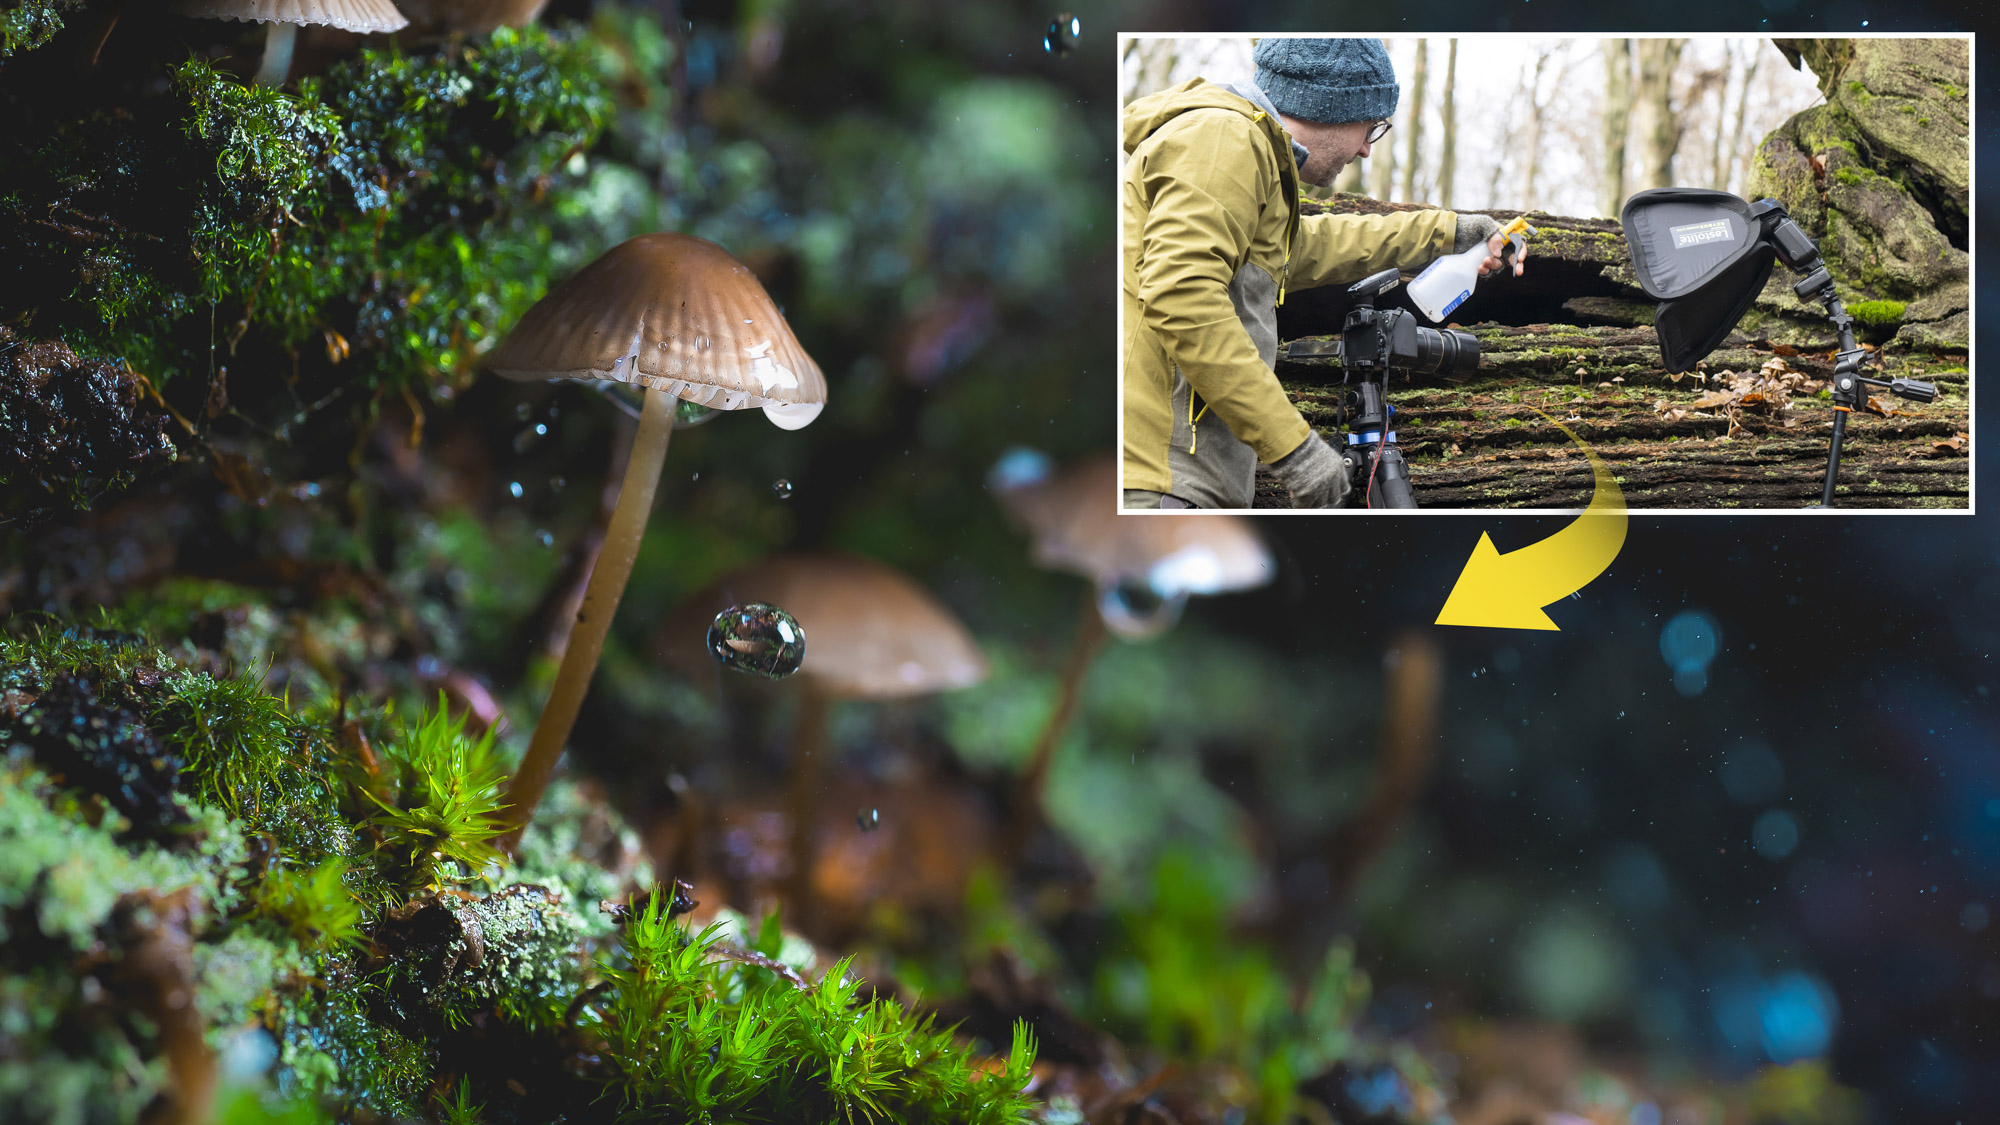 Use flash on fungi in the forest for magical mushroom close-up photography!